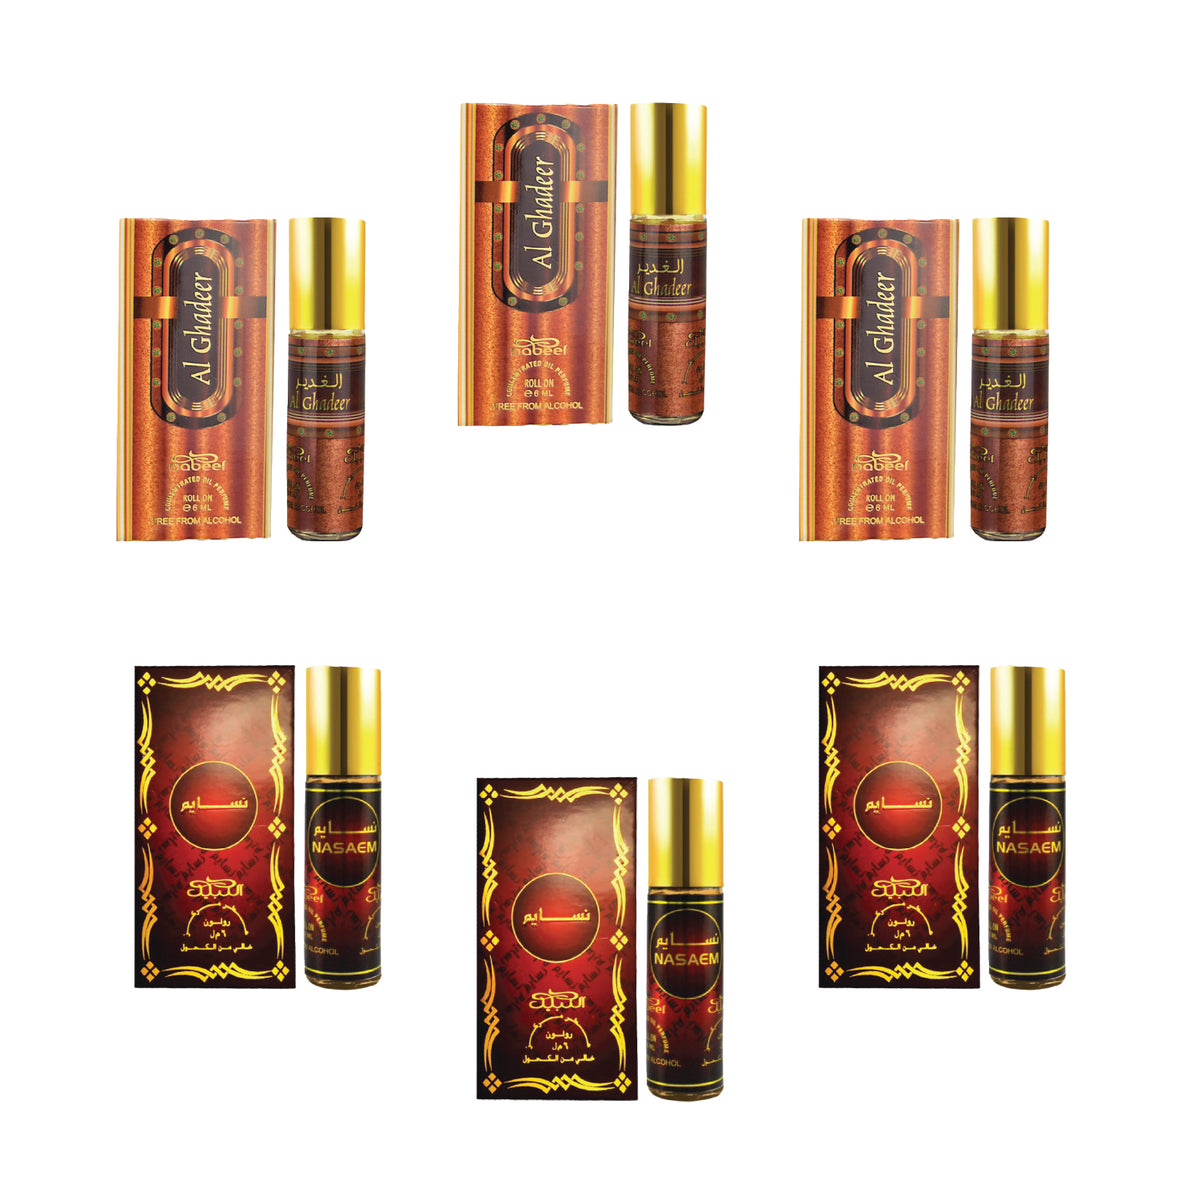 Nabeel - Premium Attar Roll-on Perfume Oil - Collection 8 - Al Ghadeer, Nasaem | 100% Non Alcoholic | Gift Set - 6ml (Pack of 6) | Made in U.A.E